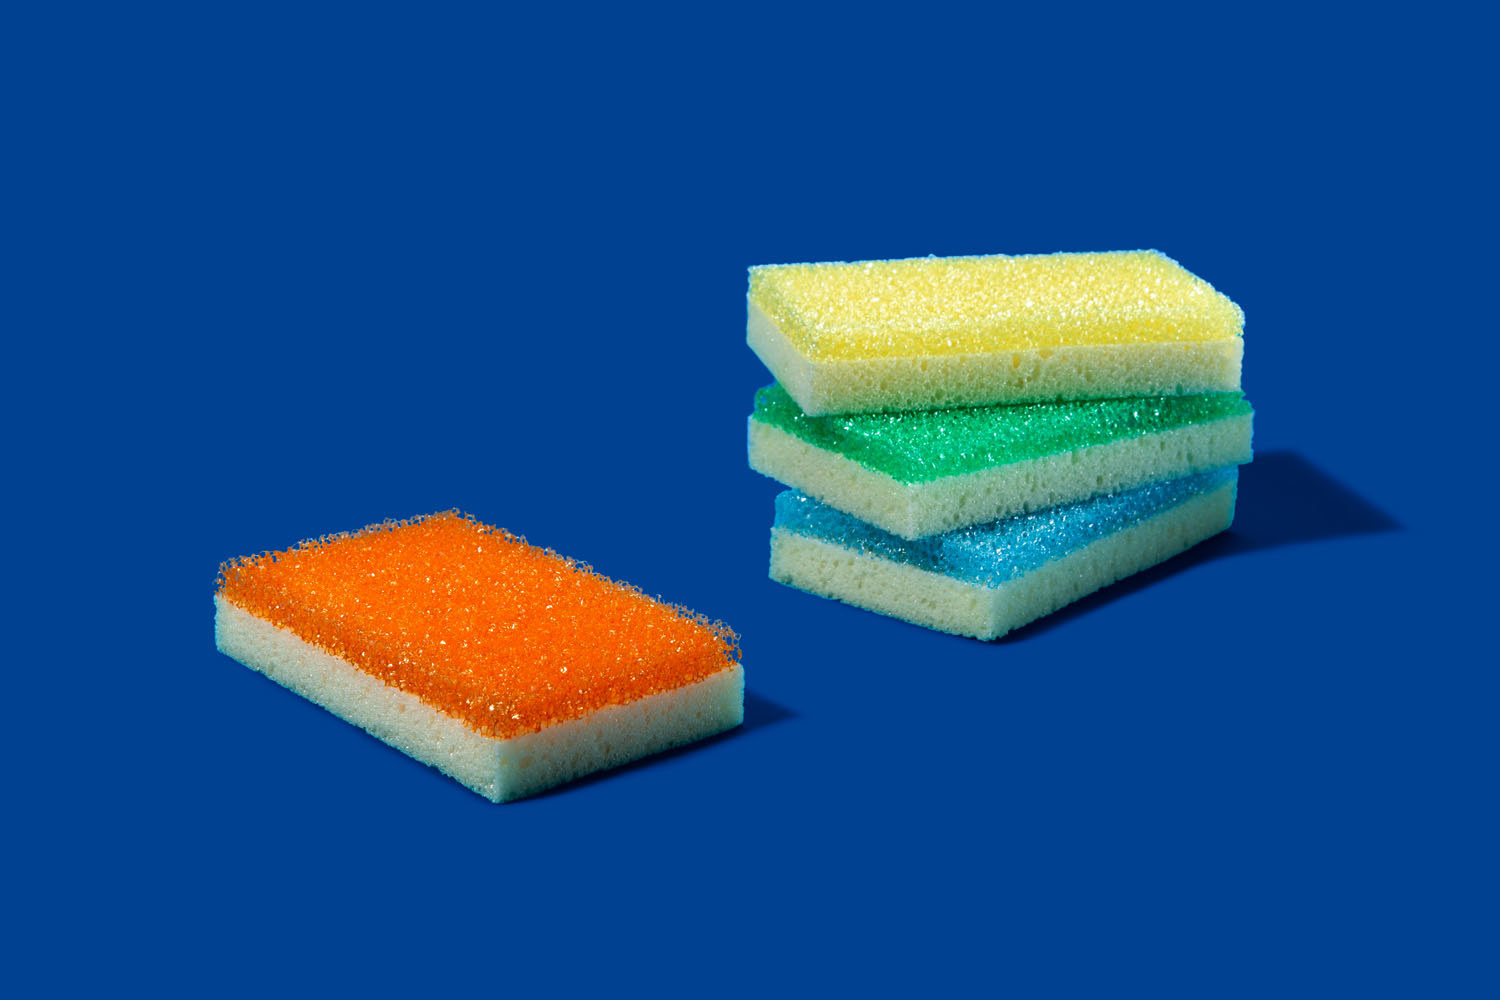 Kitchen Cleaning Sponges,Eco Non-Scratch for Dish,Scrub Sponges Pack of 6-24 